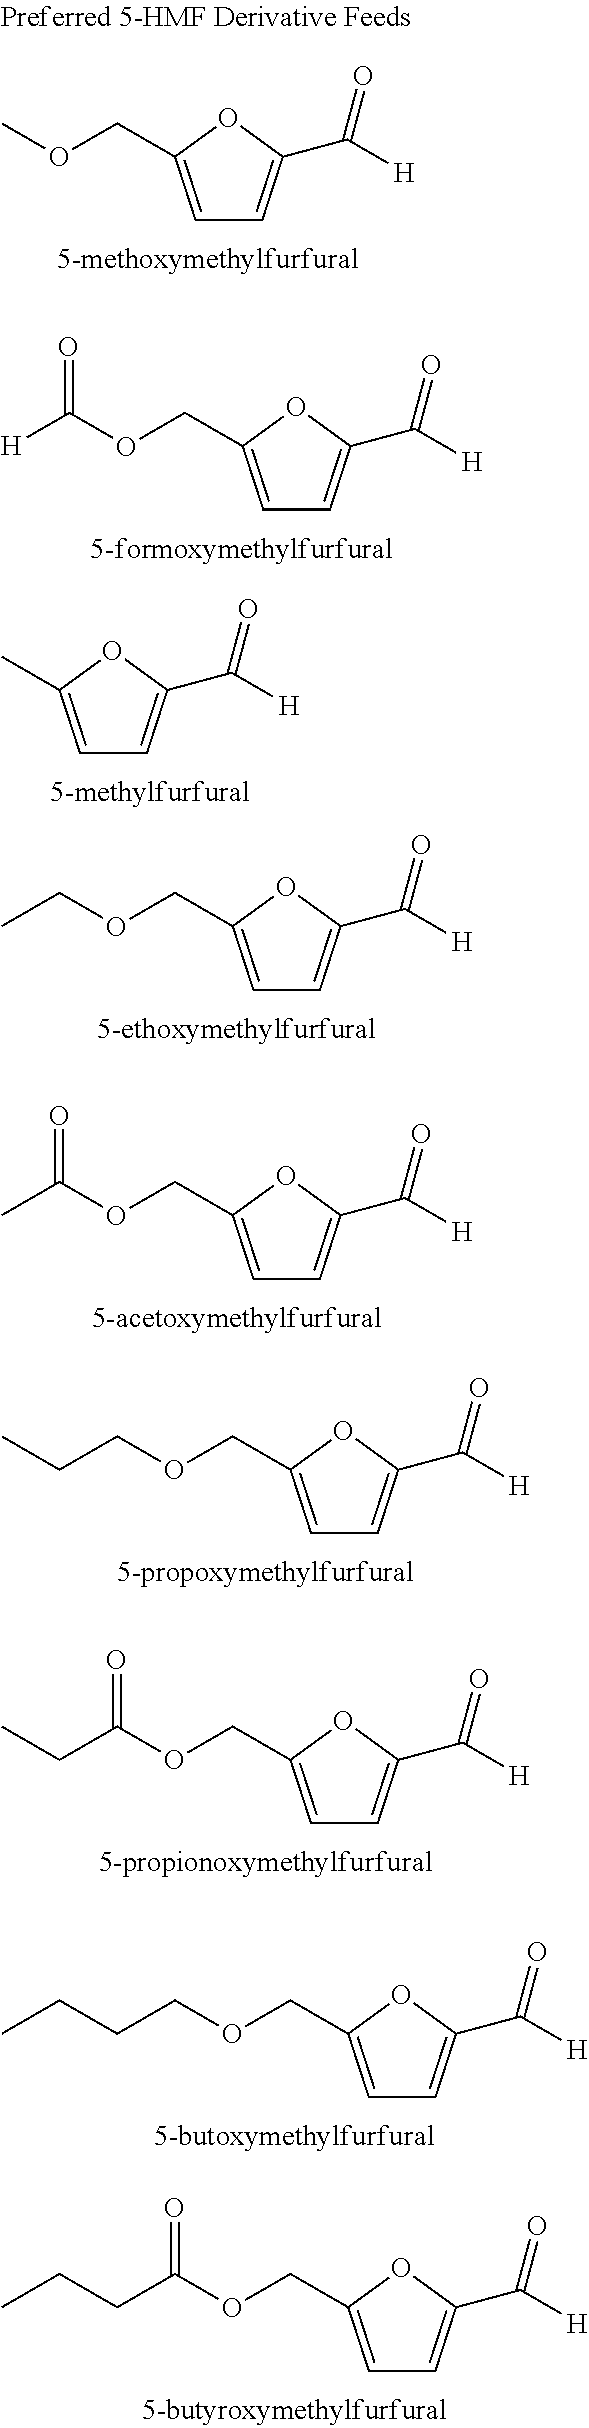 Oxidation process to produce a purified carboxylic acid product via solvent displacement and post oxidation